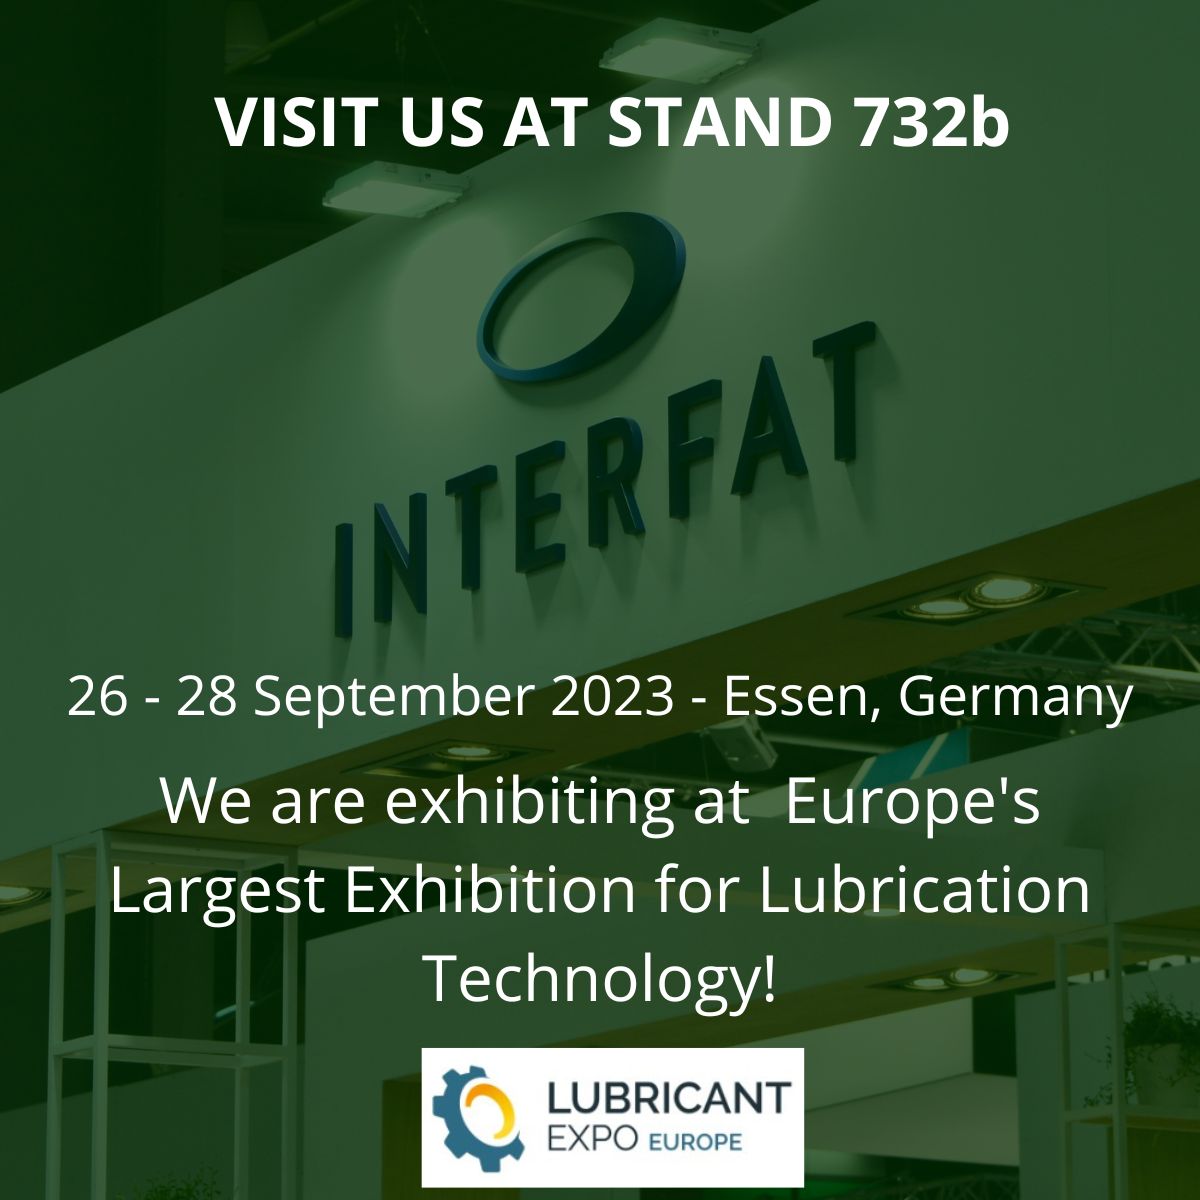 Interfat will be attending the Lubricant Expo